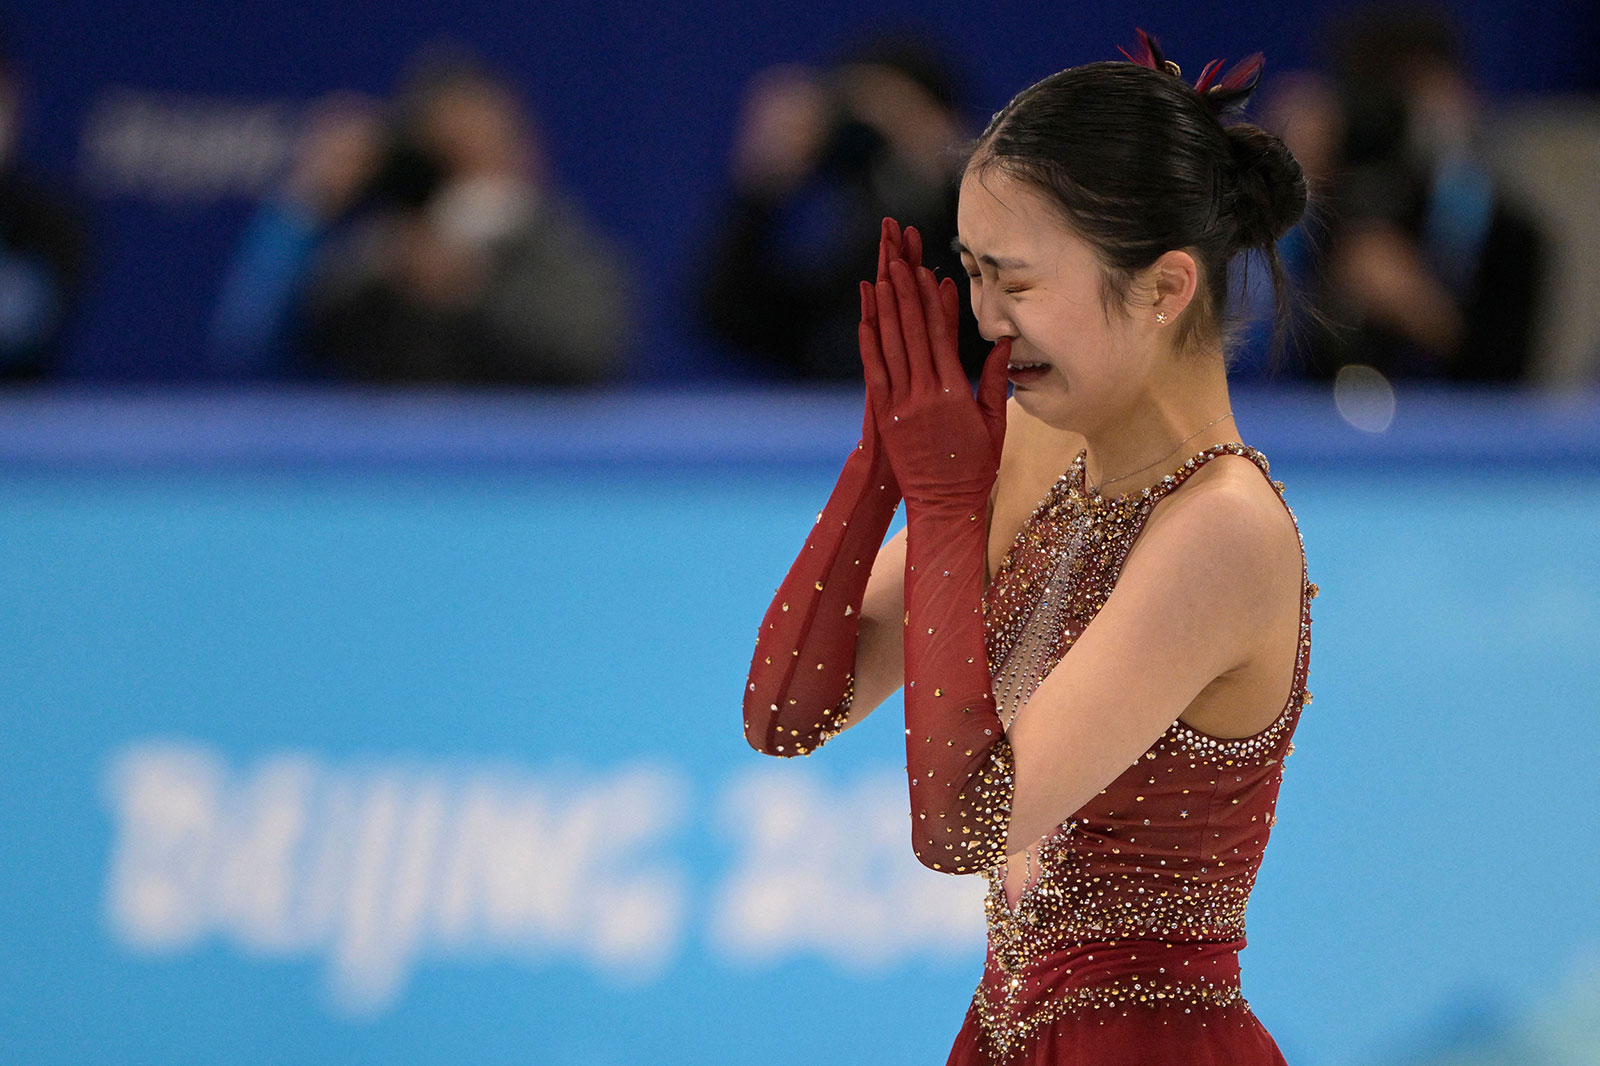 Chinese figure skater Zhu Yi breaks down in tears after competing in the team event on February 7.